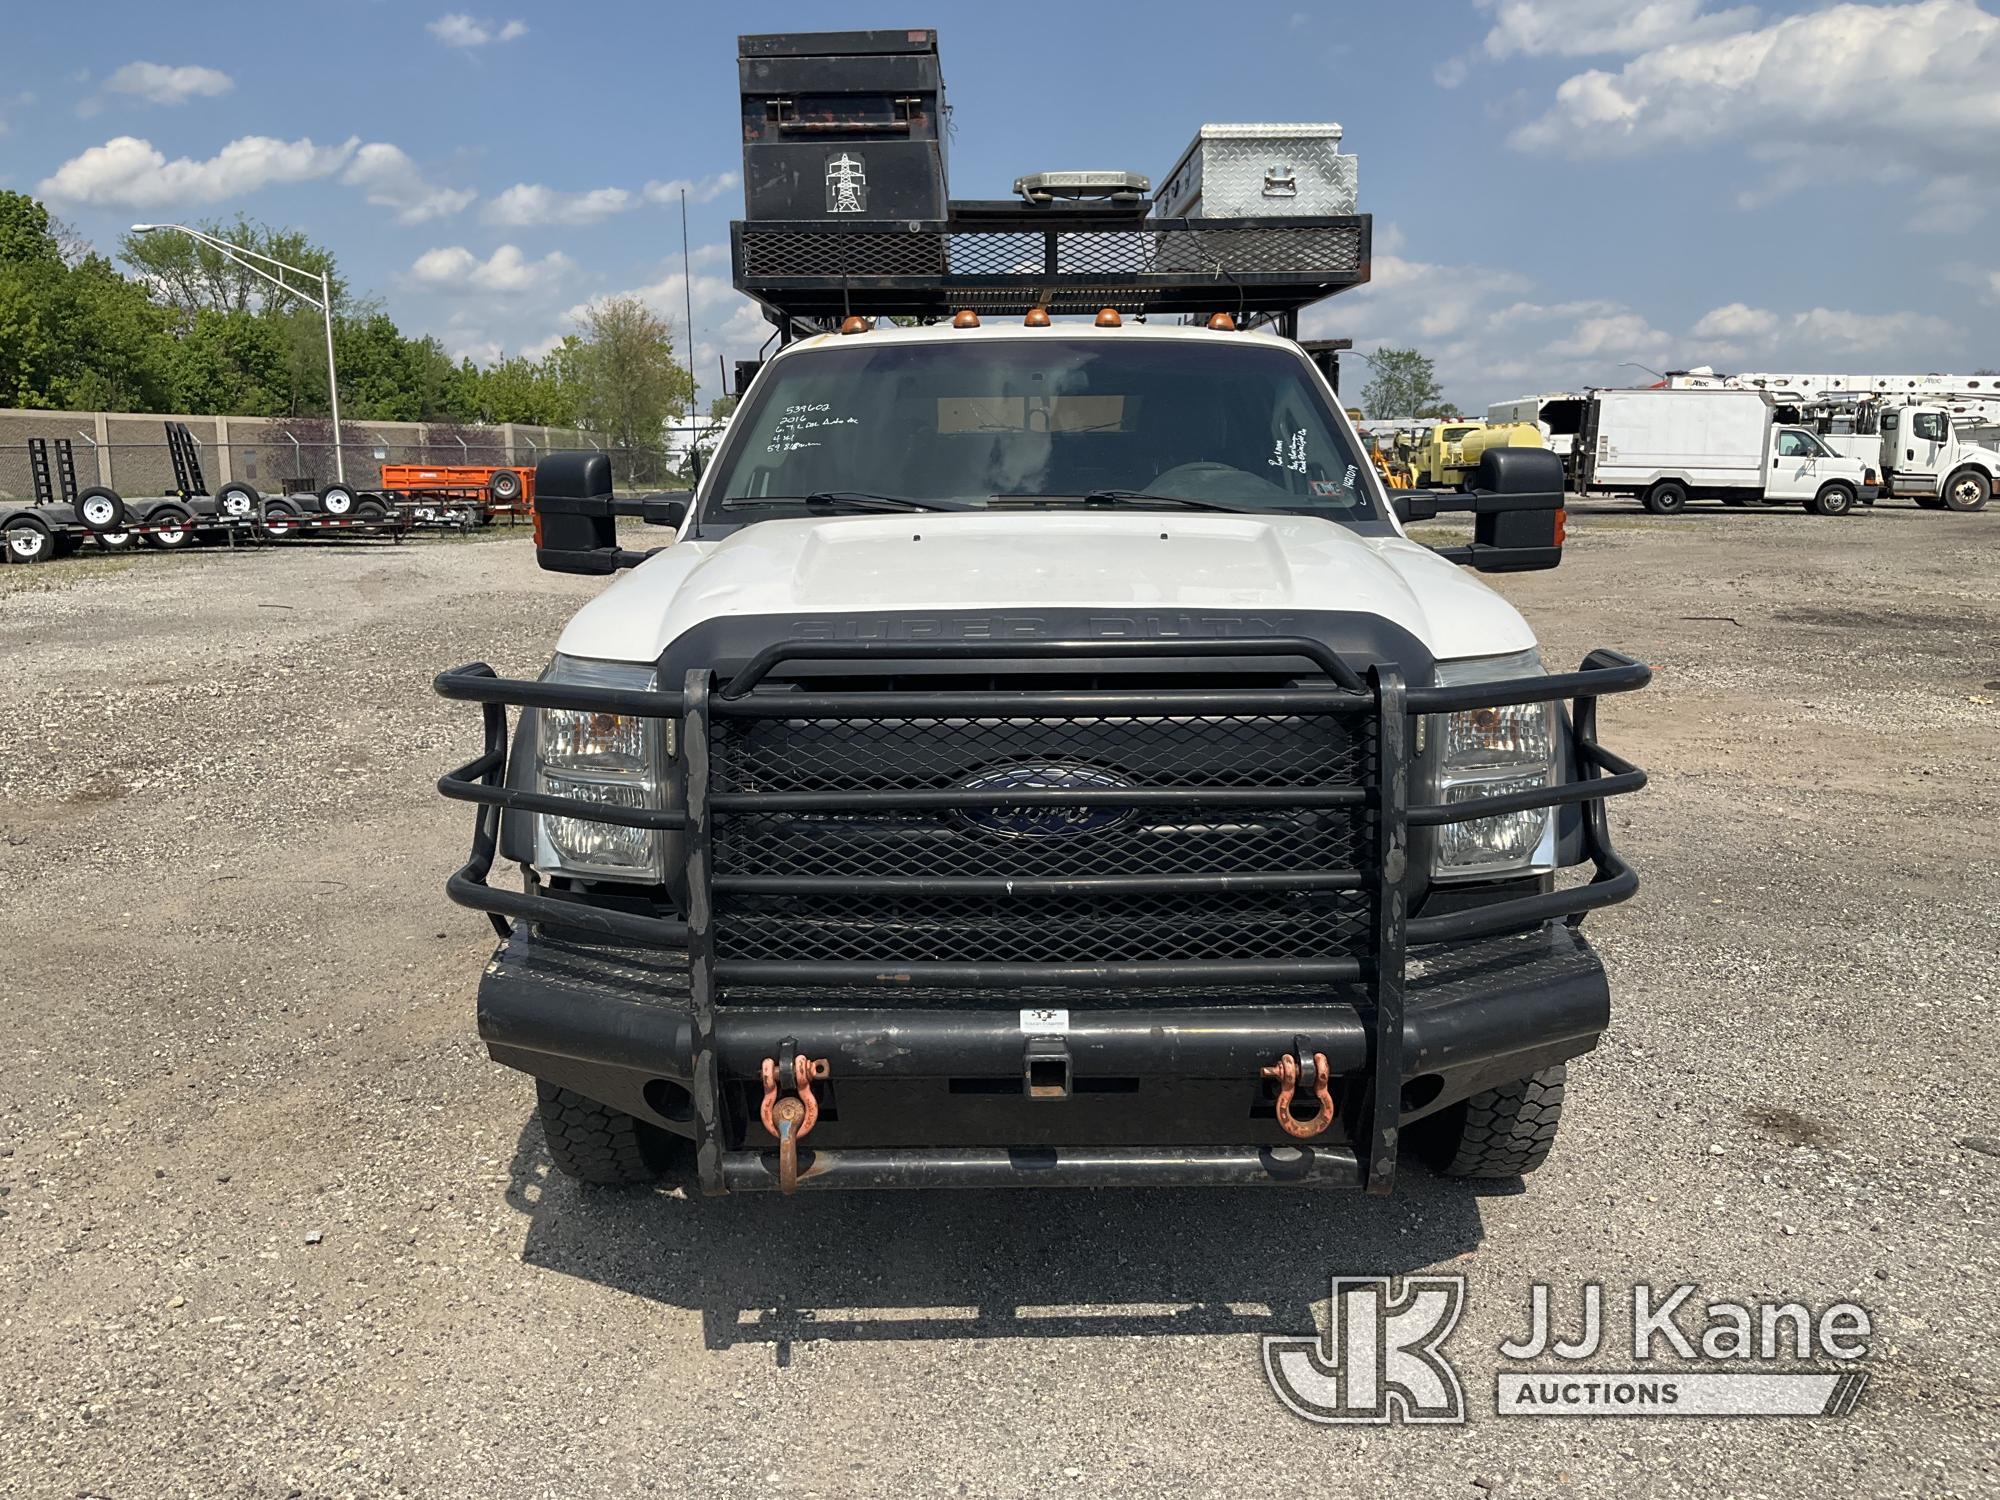 (Plymouth Meeting, PA) 2016 Ford F550 4x4 Crew-Cab Flatbed Truck Runs & Moves, Body & Rust Damage, C